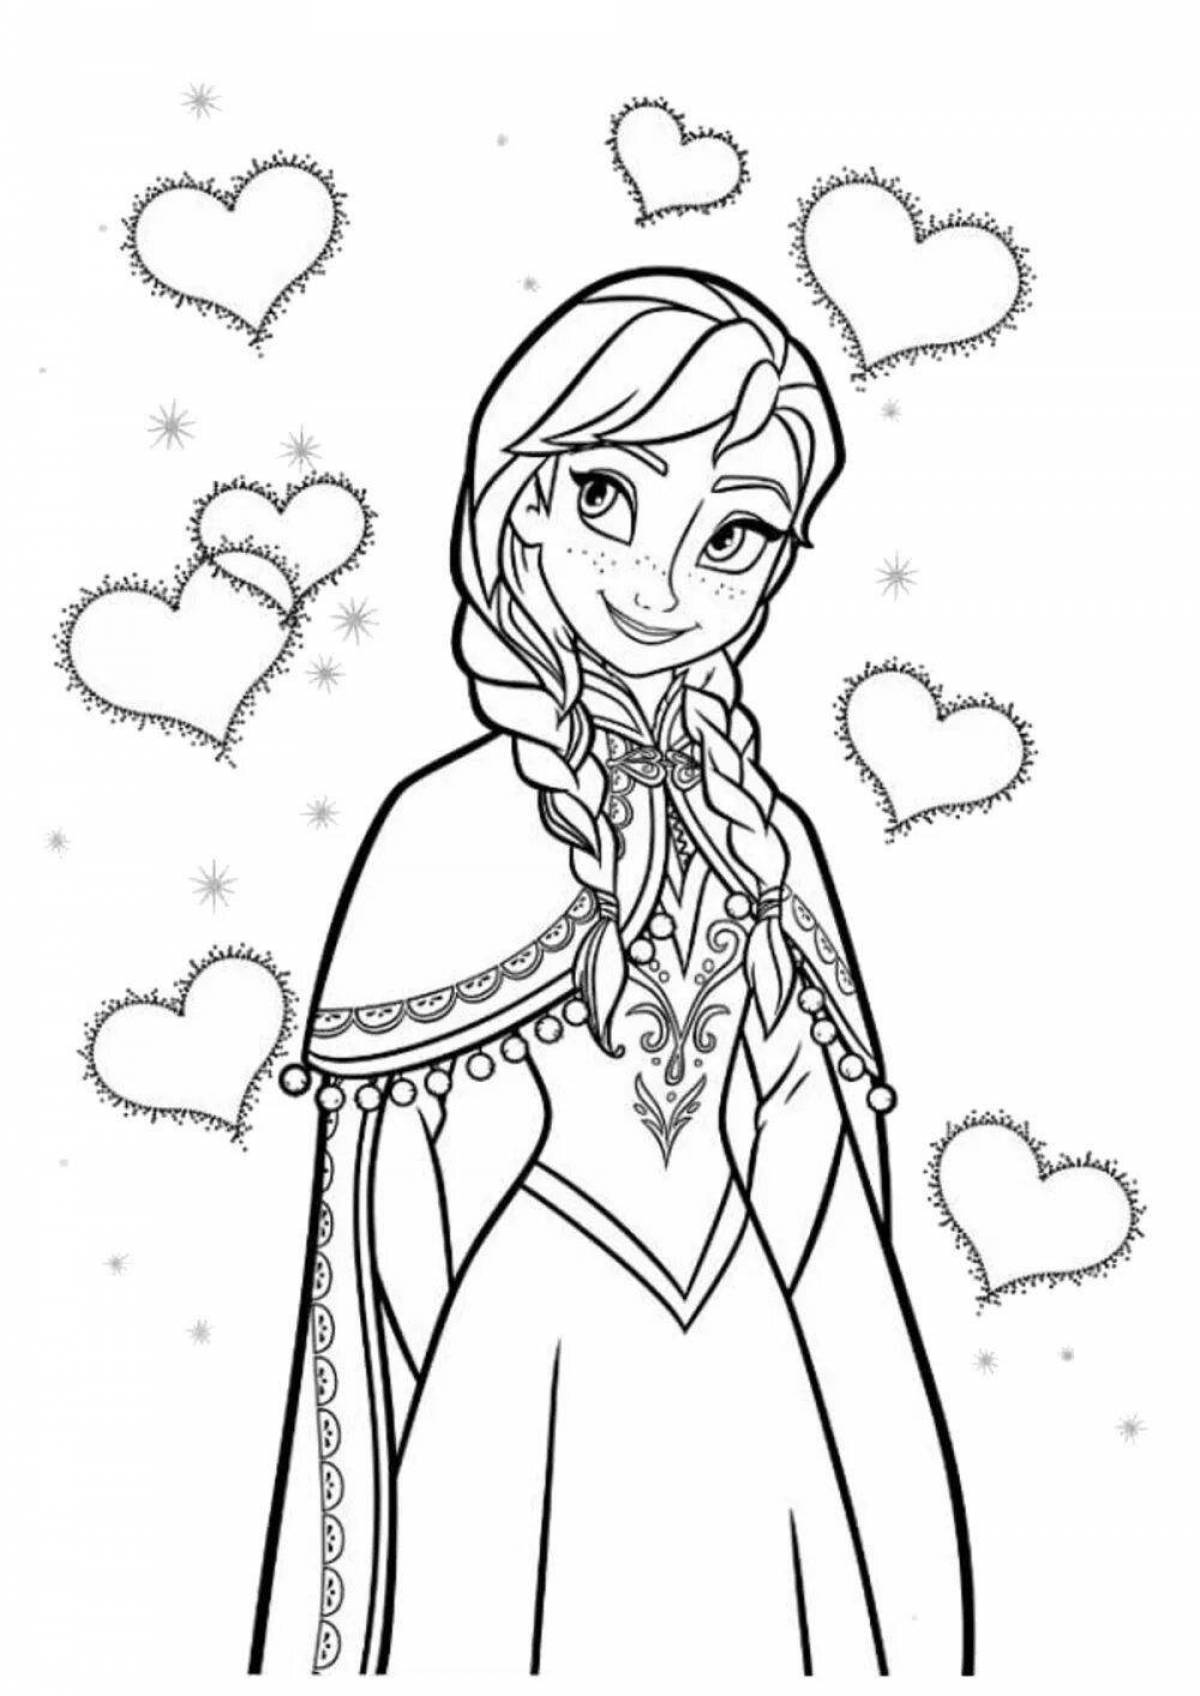 Coloring elsa and anna frozen 2